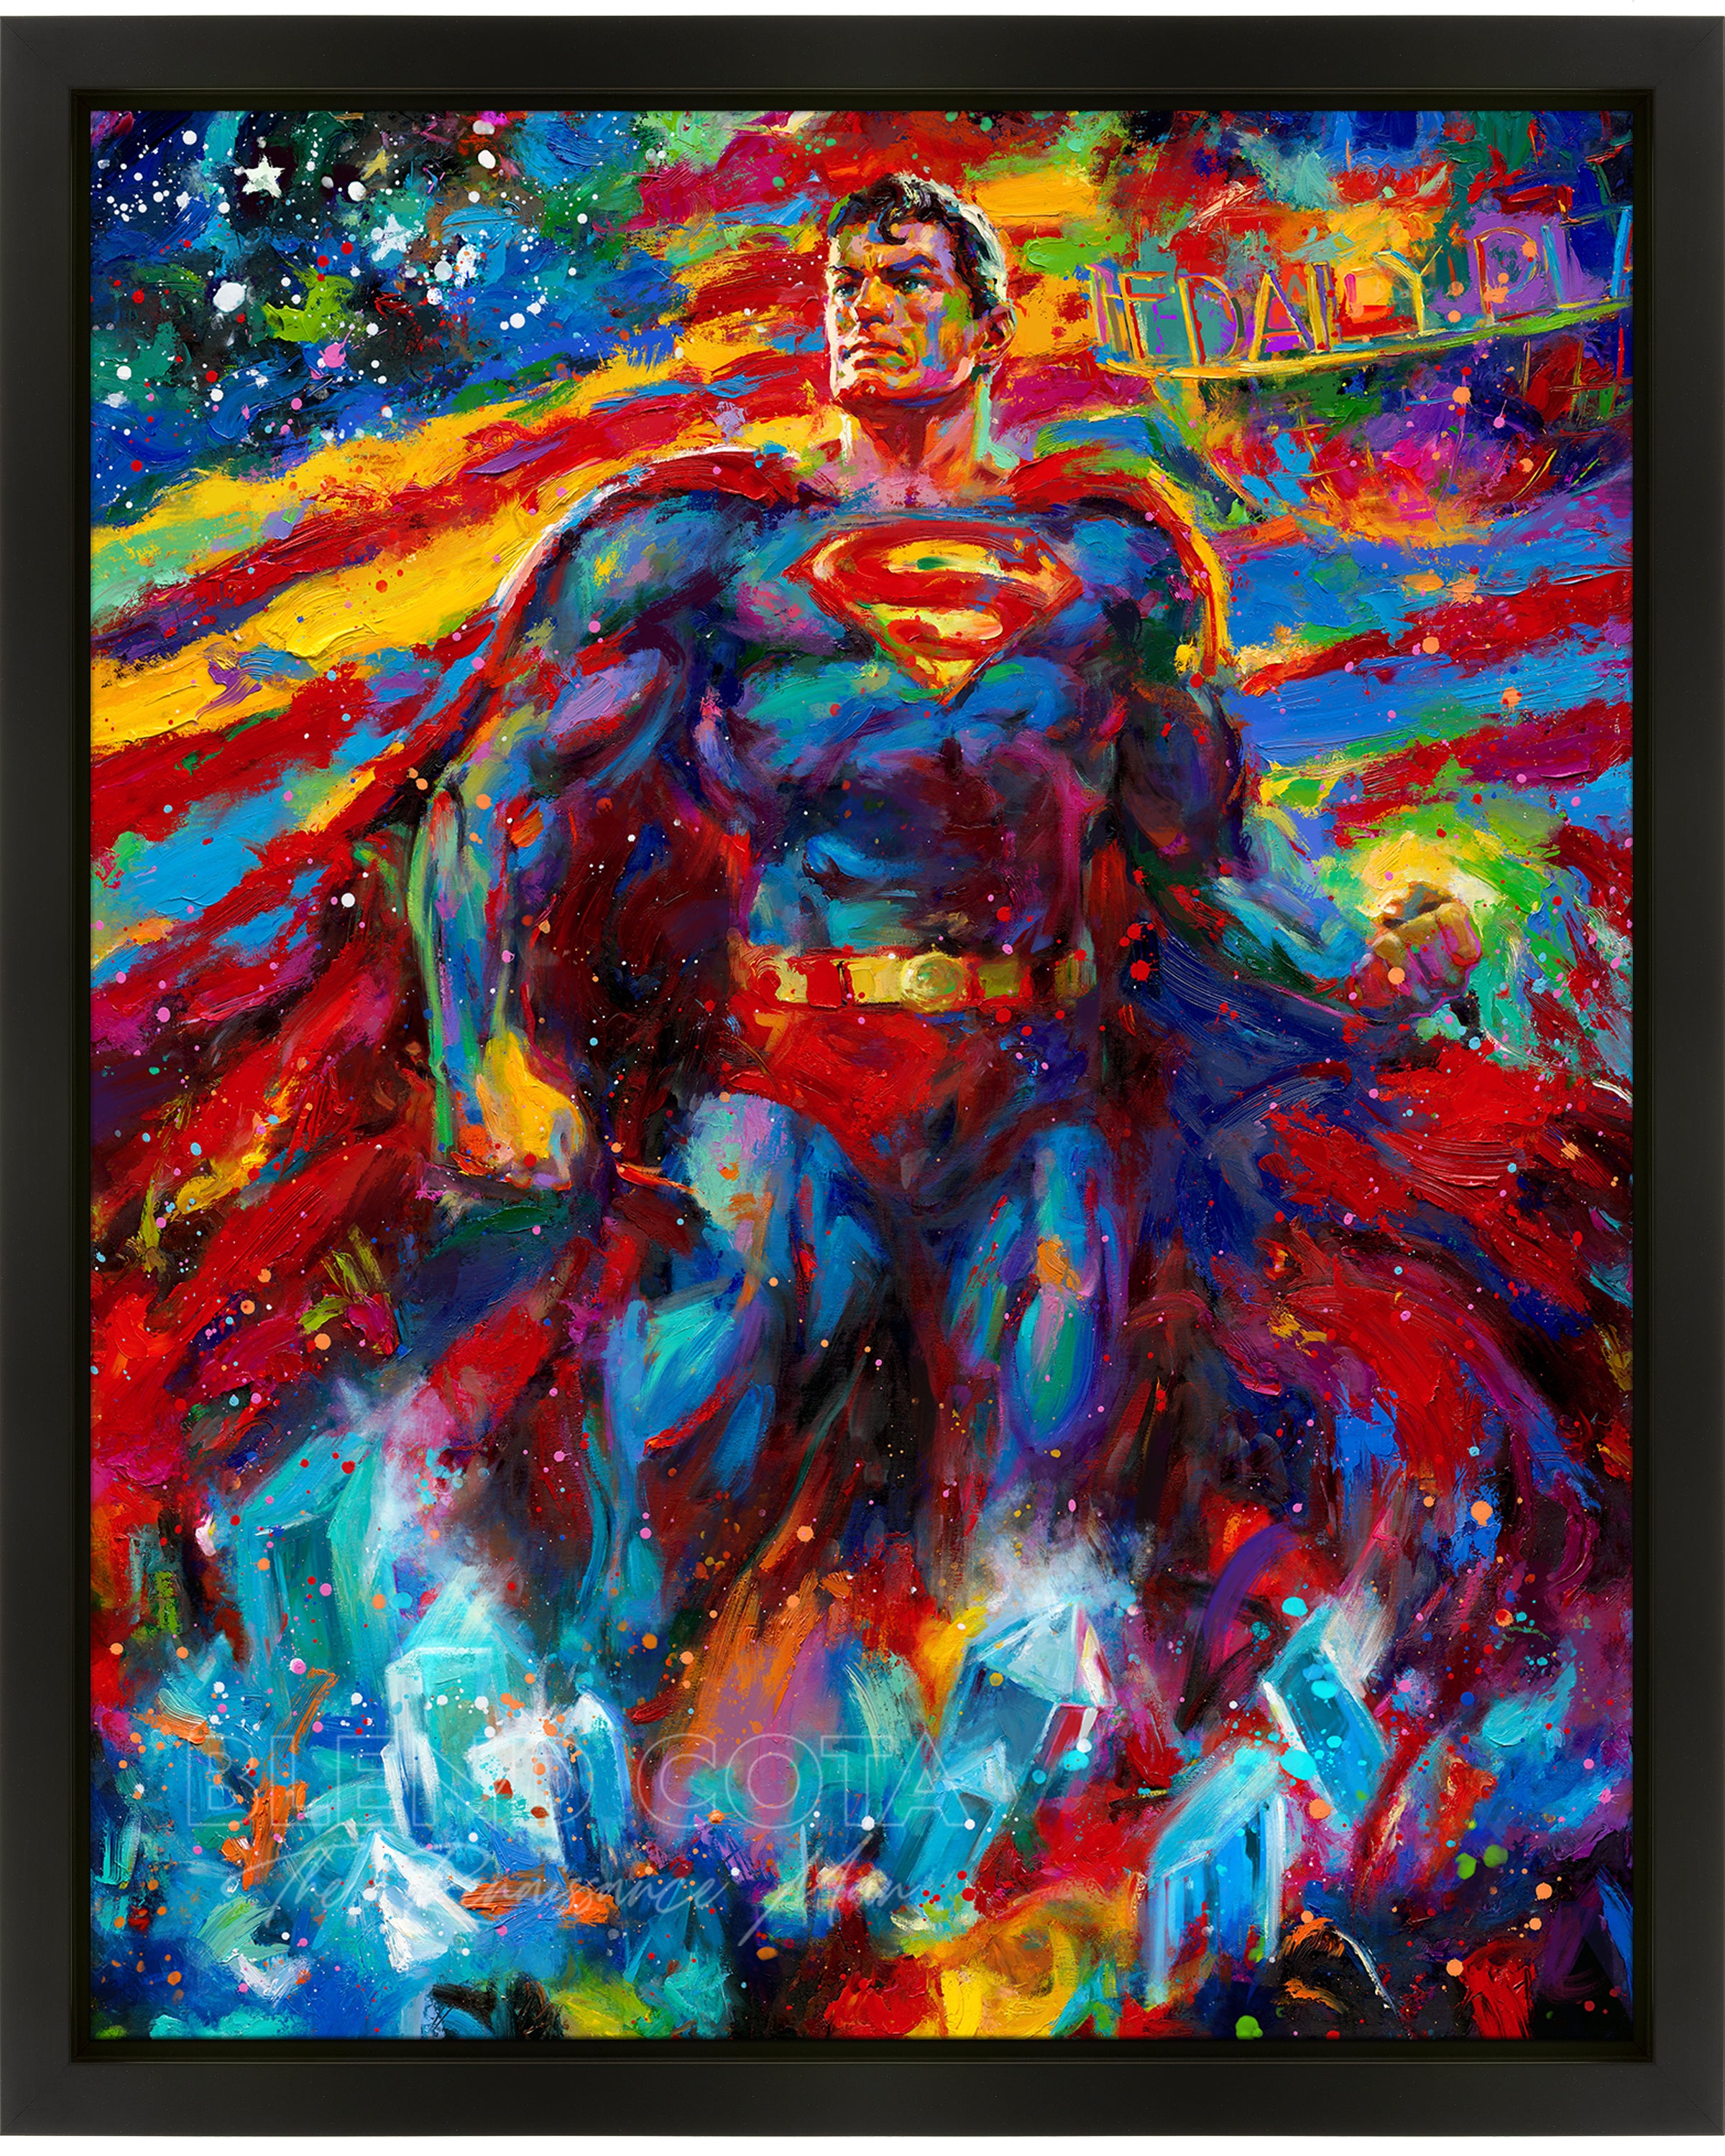 Oil on canvas original painting of Superman, DC Comics Last Son of Krypton, patriotic and protector of America and earth, red blue and yellow paint with a flag of USA, guarding those he loves, in colorful brushstrokes, color expressionism style.